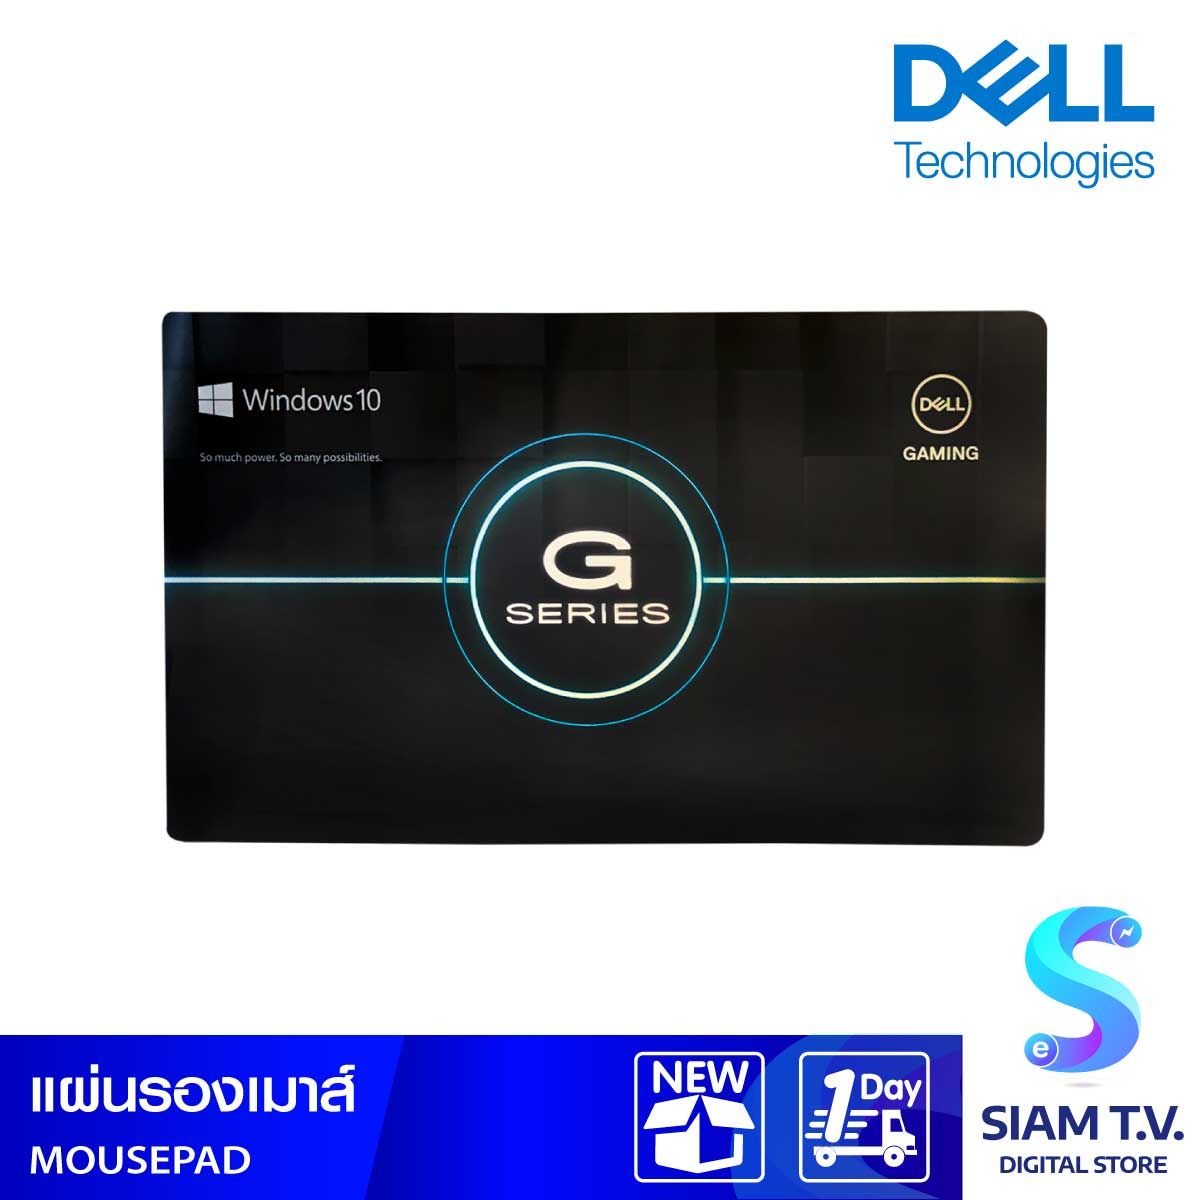 DELL MOUSE PAD